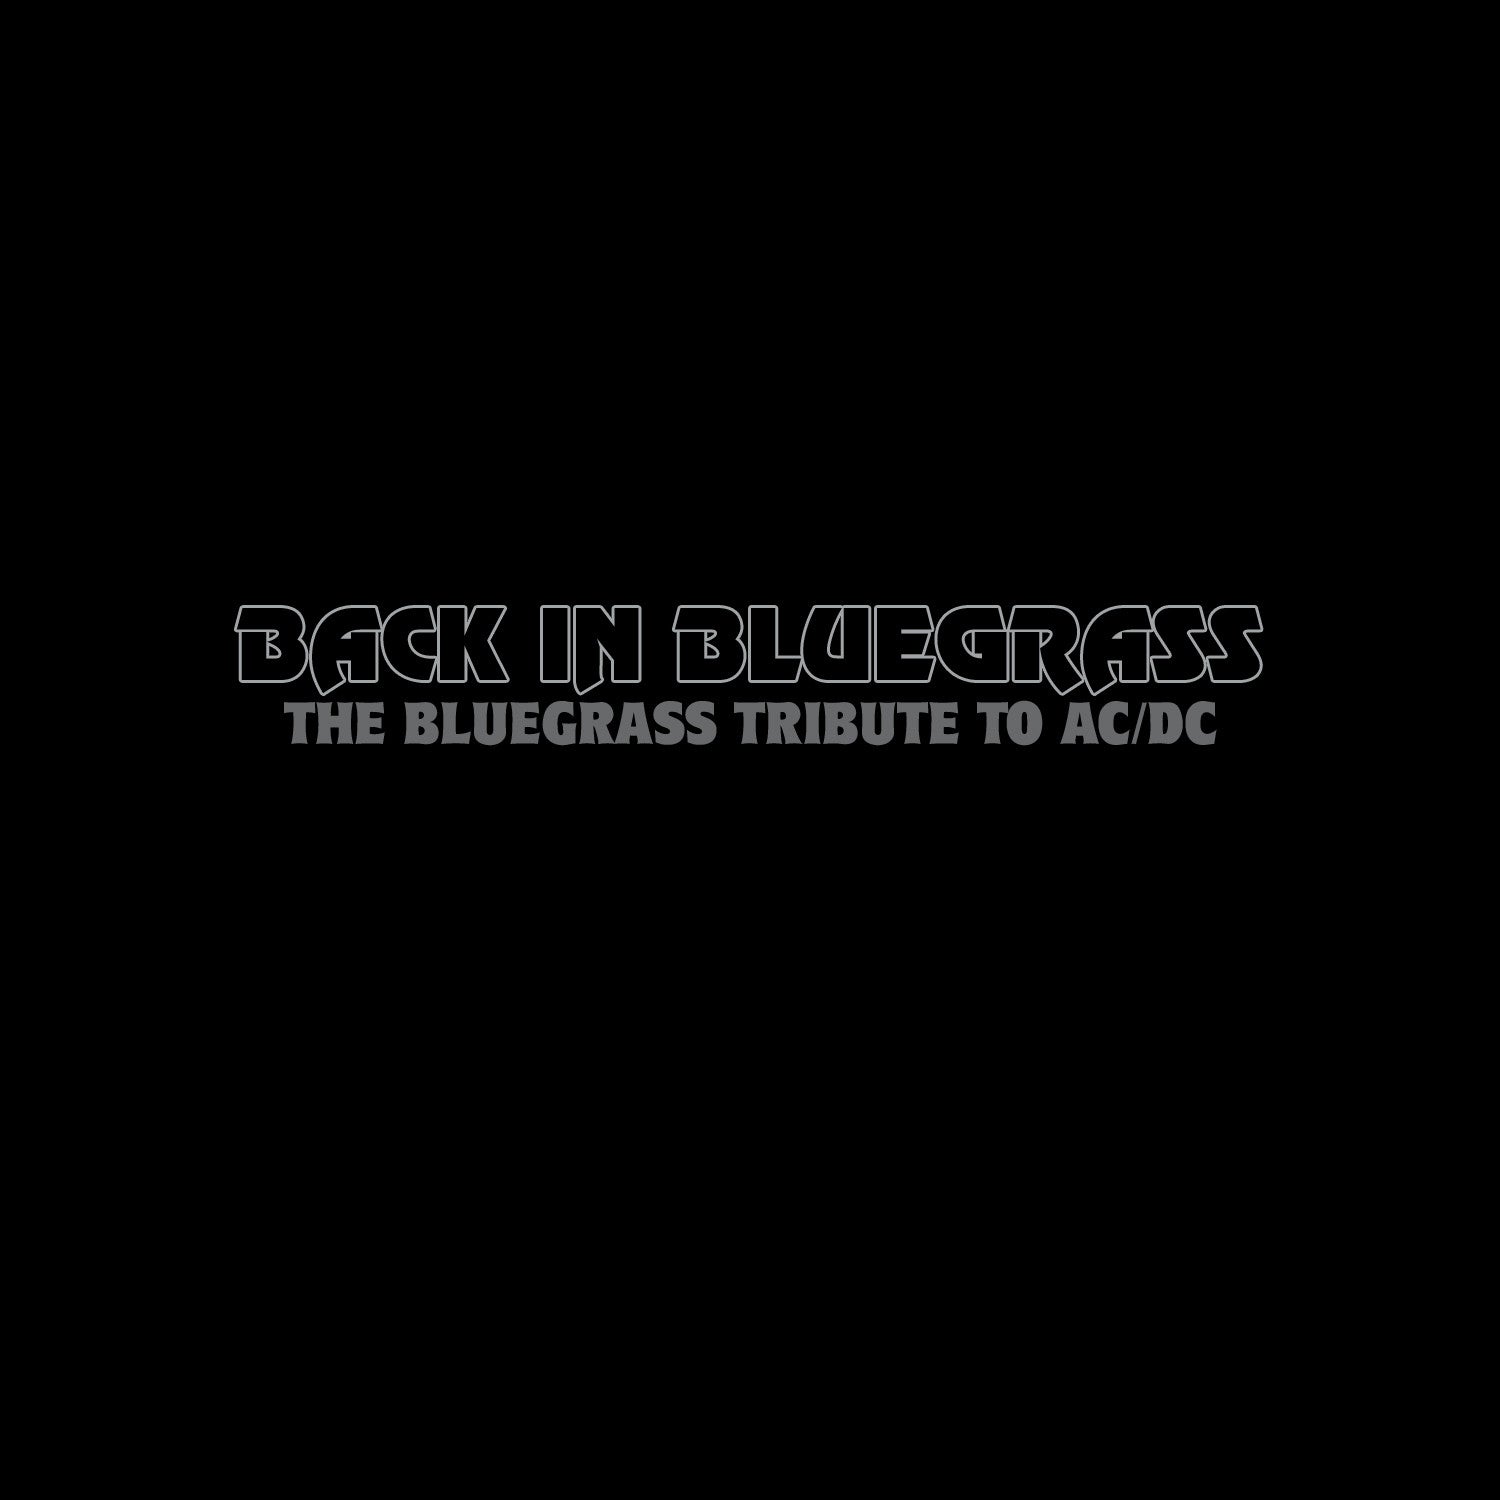 Back In Bluegrass: The Bluegrass Tribute to AC/DC